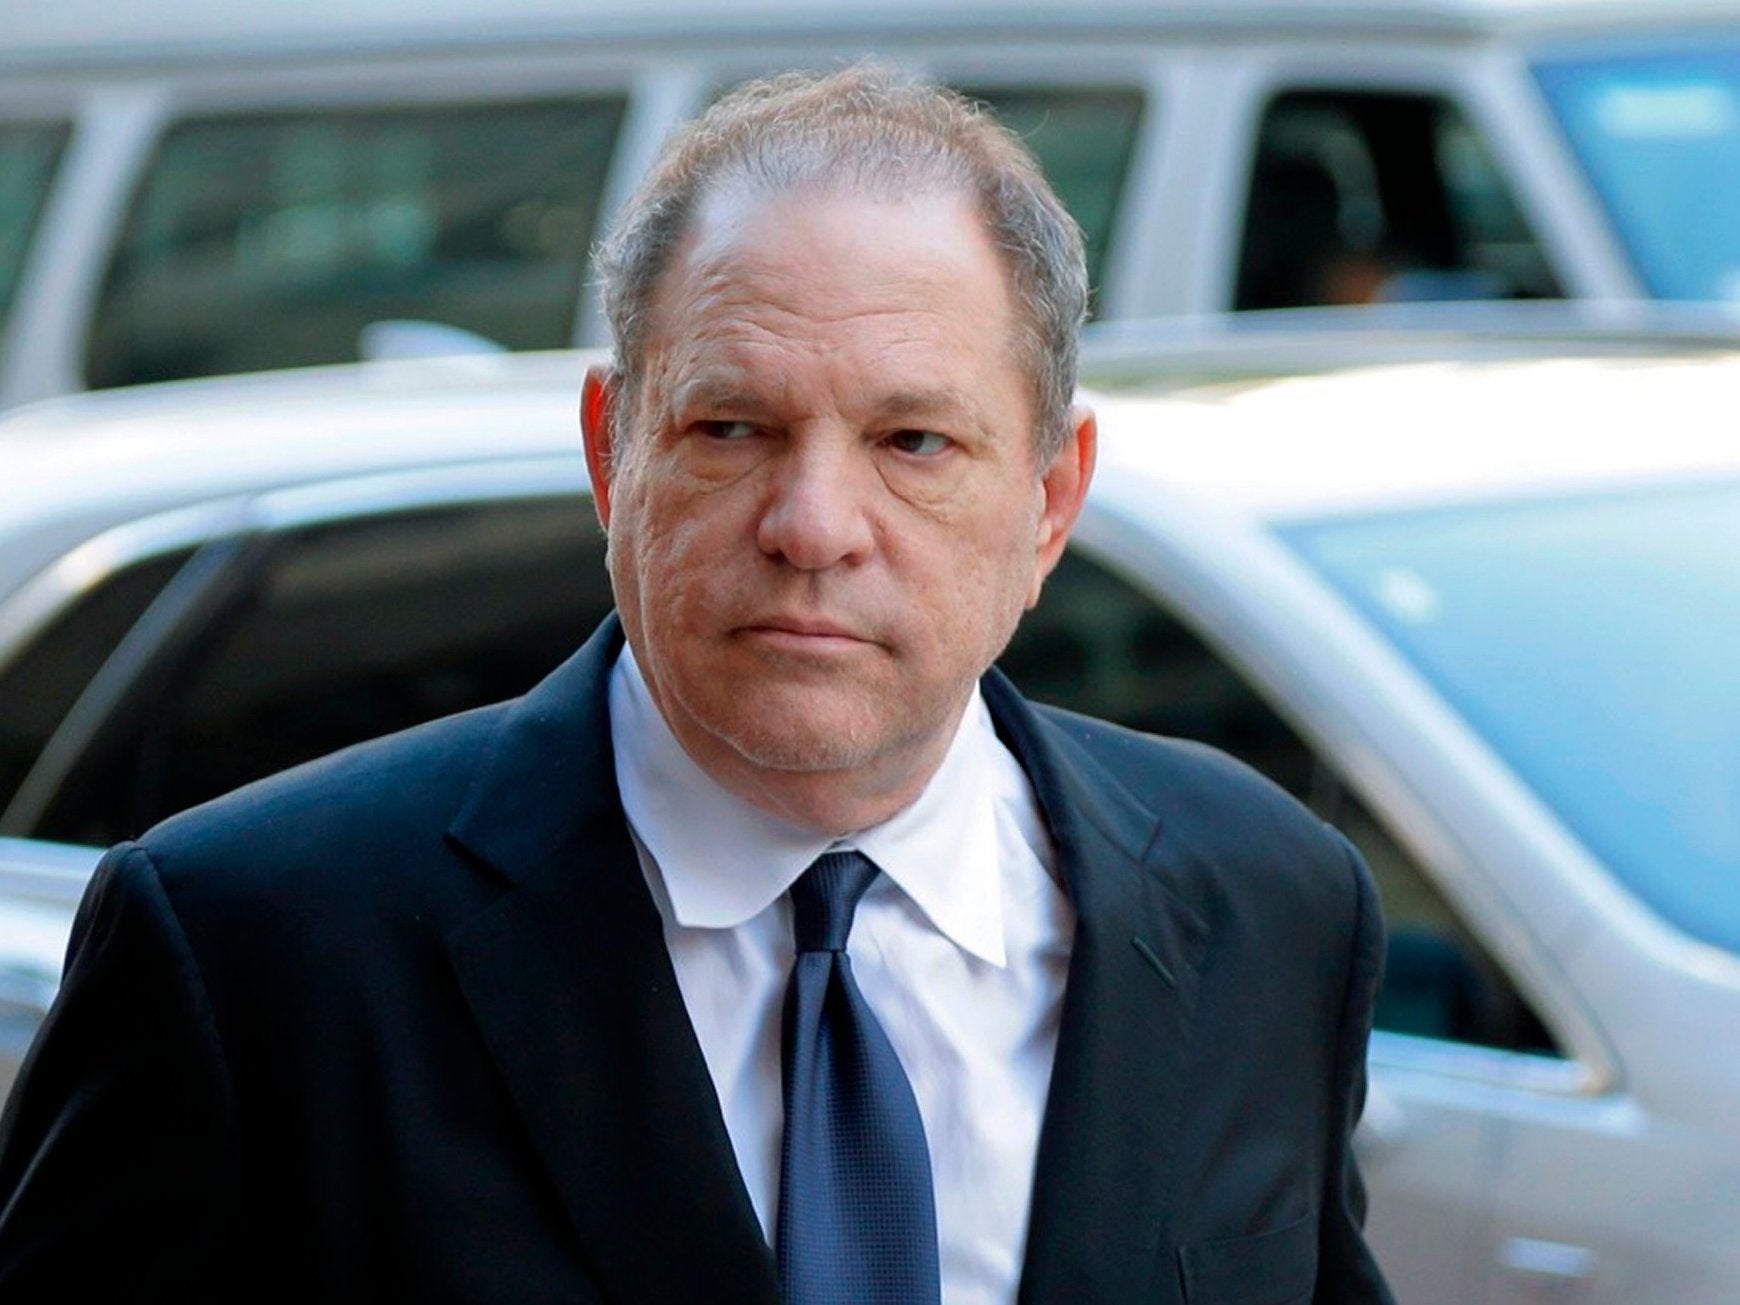 Mr Weinstein has been accused by more than 70 women of sexual misconduct, which he has denied